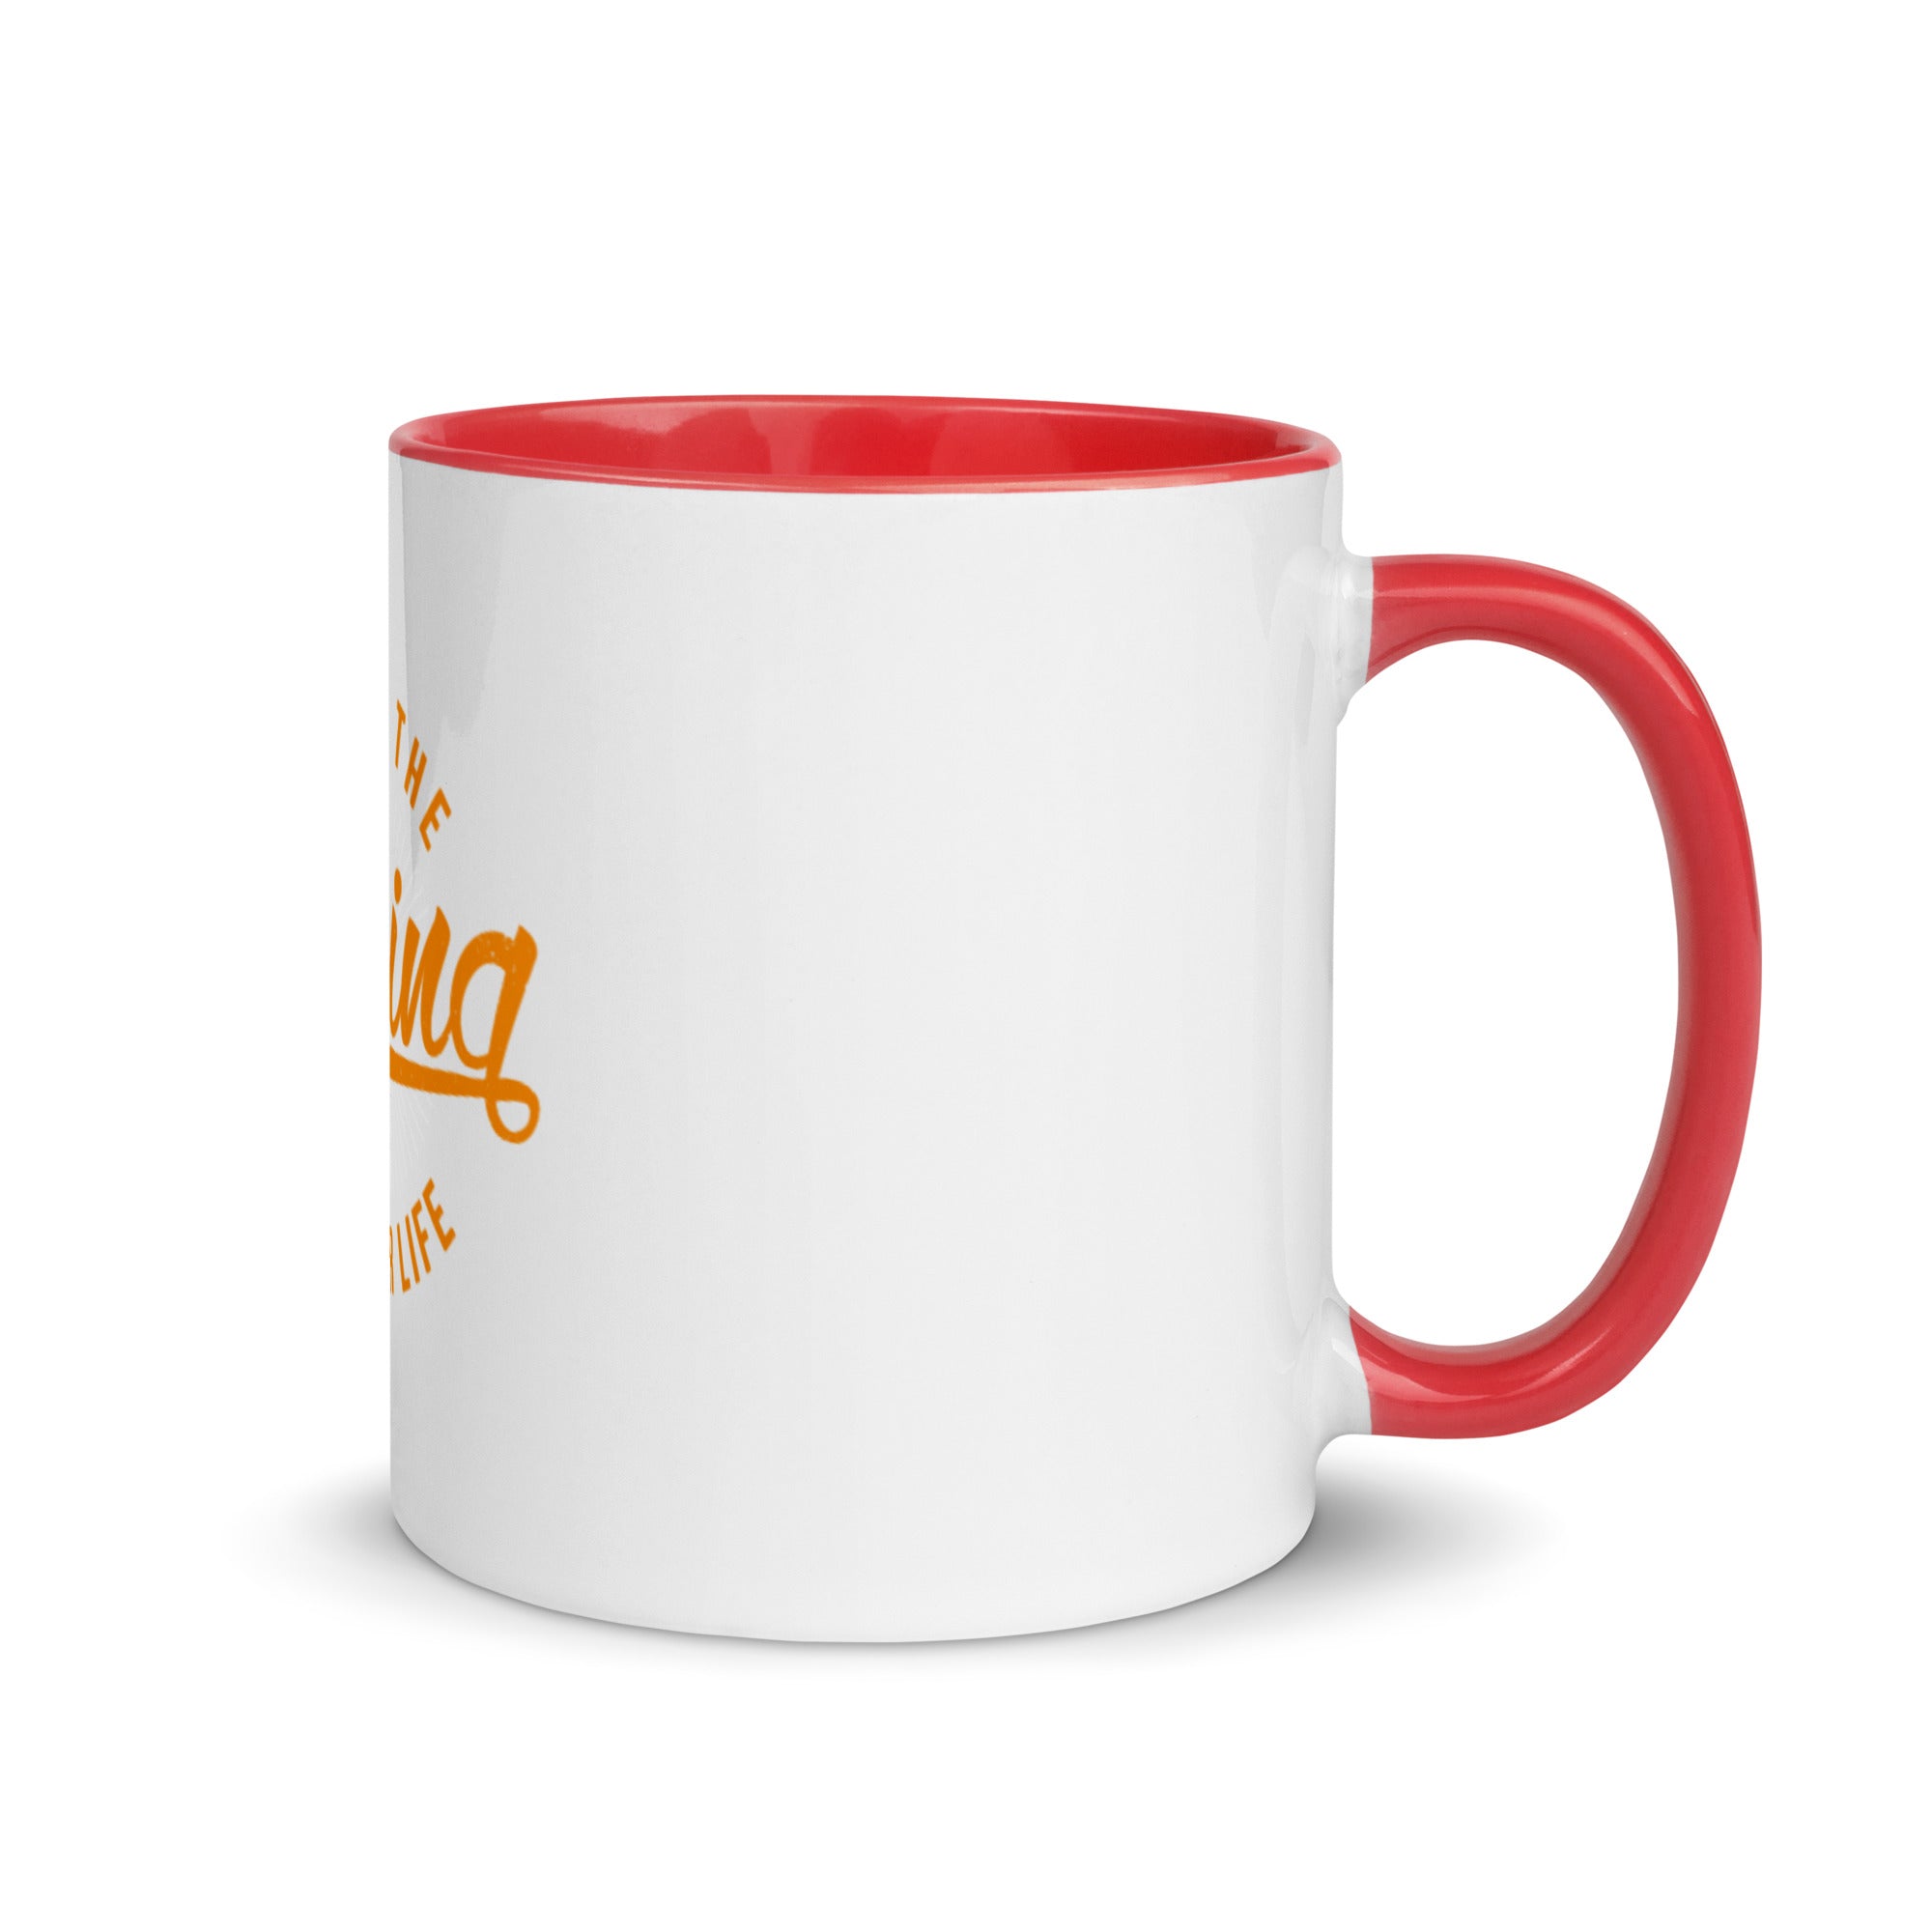 Trust The Timing Of Your Life - Mug with Color Inside